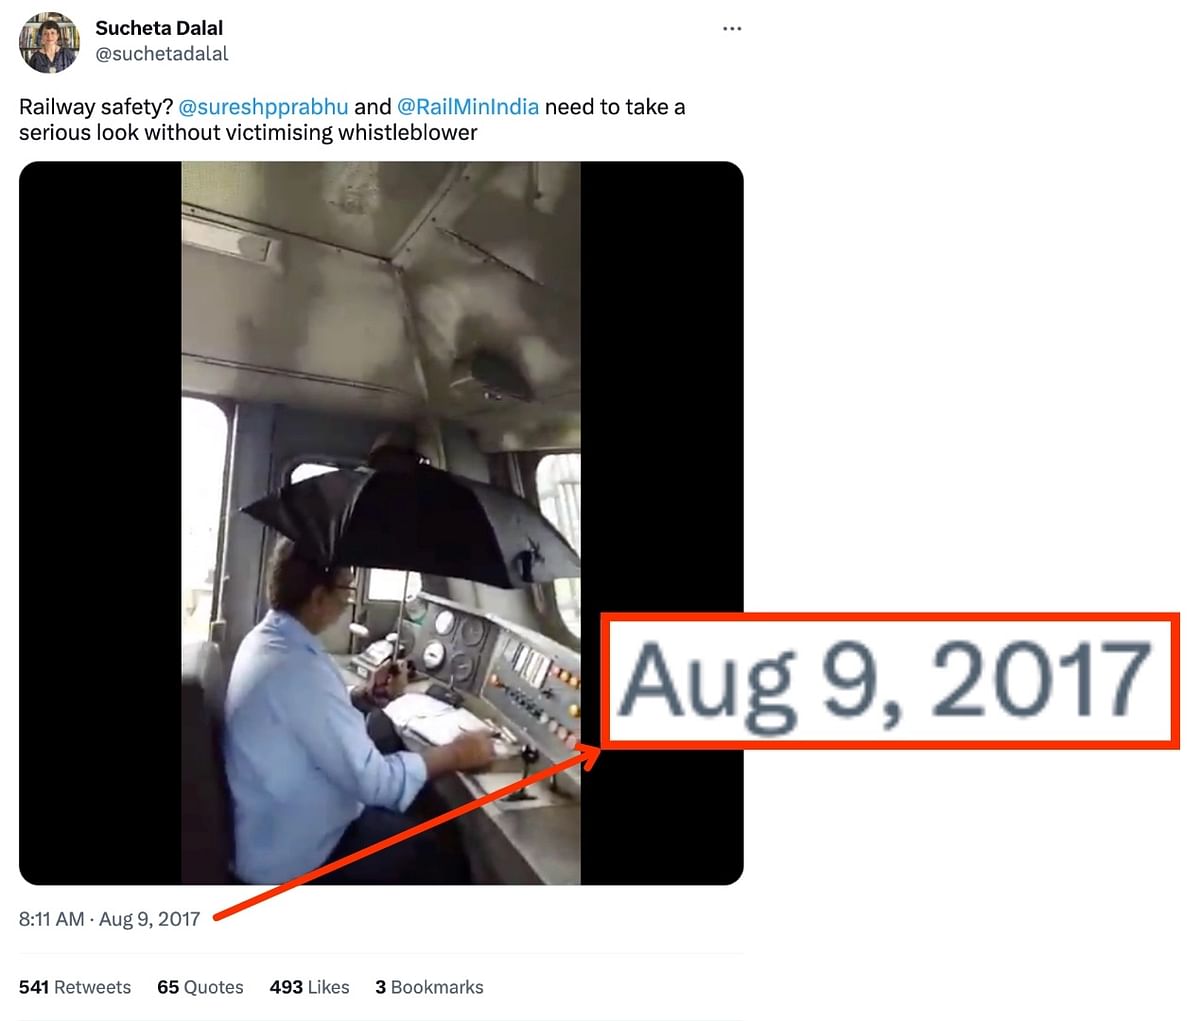 The visual dates back to 2017 and shows the loco pilot of a train running through Jharkhand.